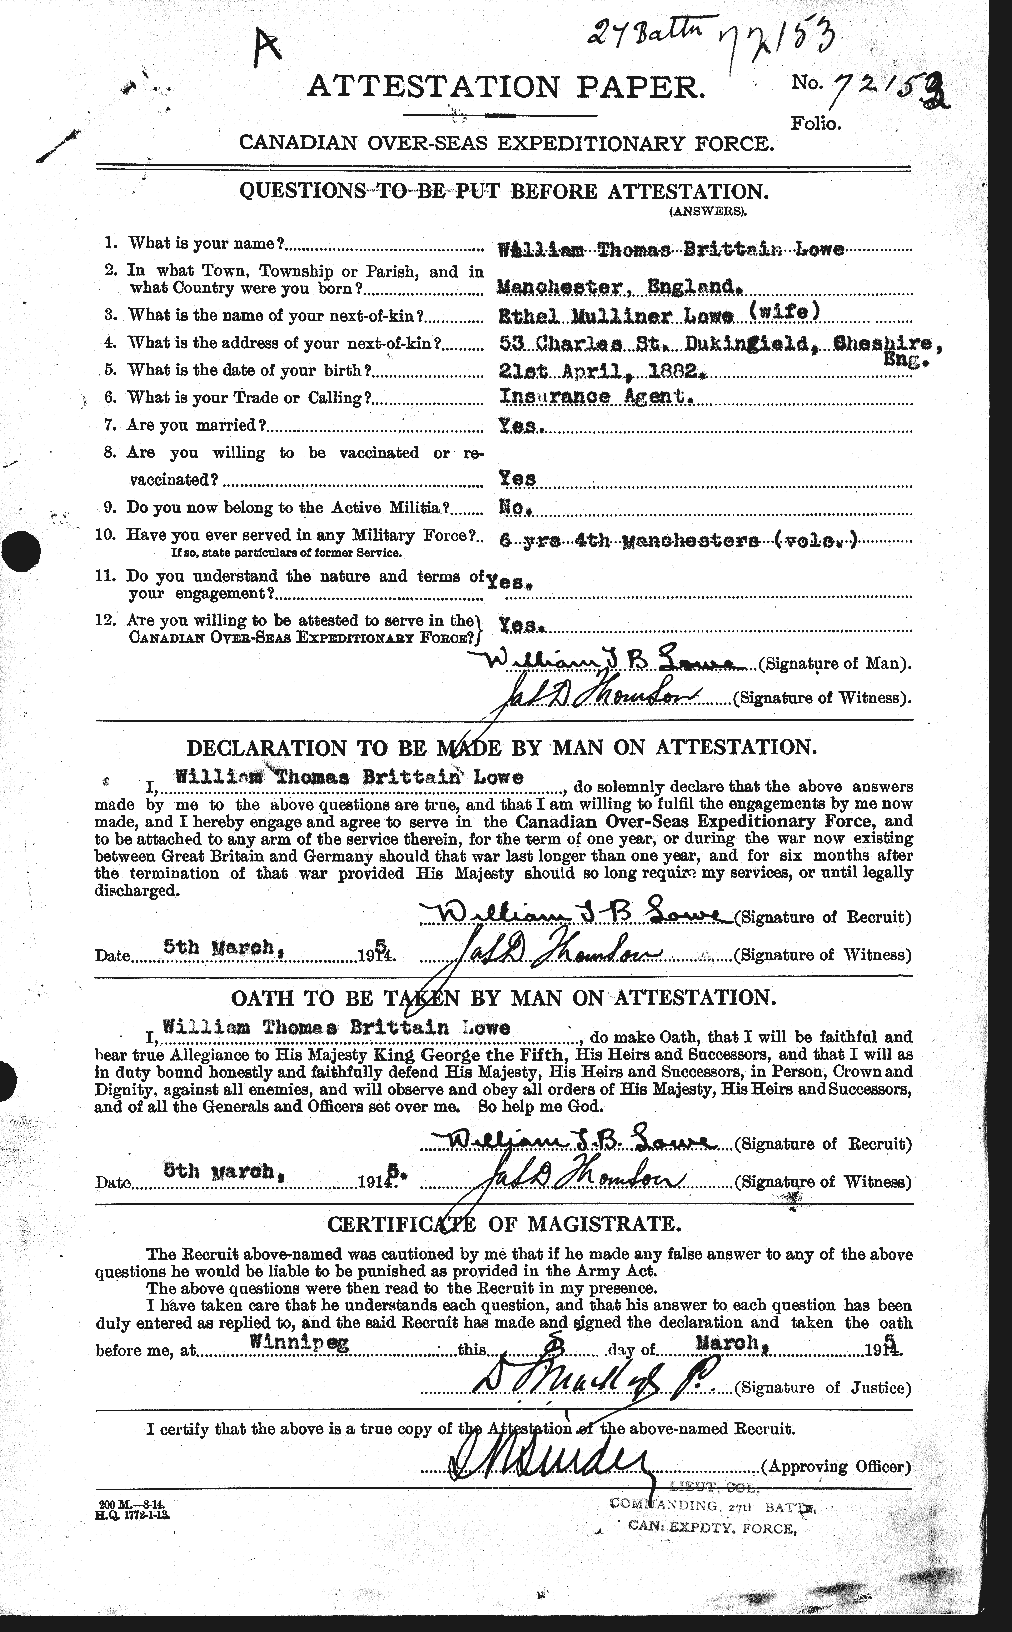 Personnel Records of the First World War - CEF 471239a